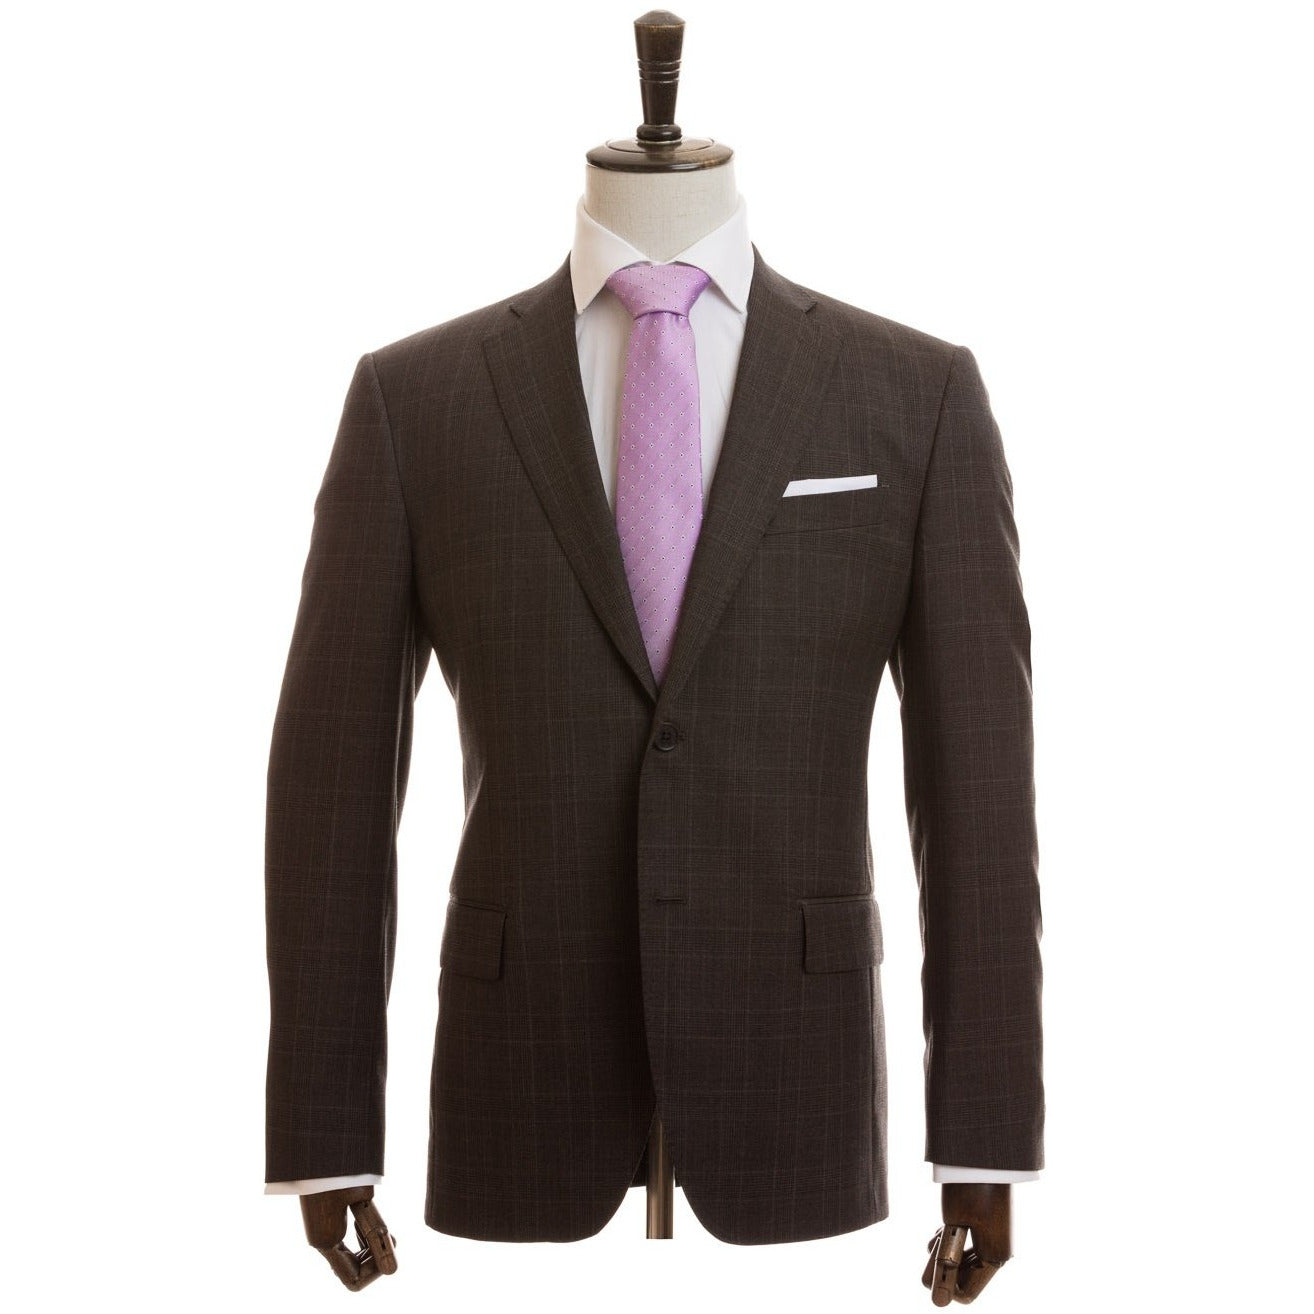 Zegna Cloth - Brown Check - Suit by Urbbana